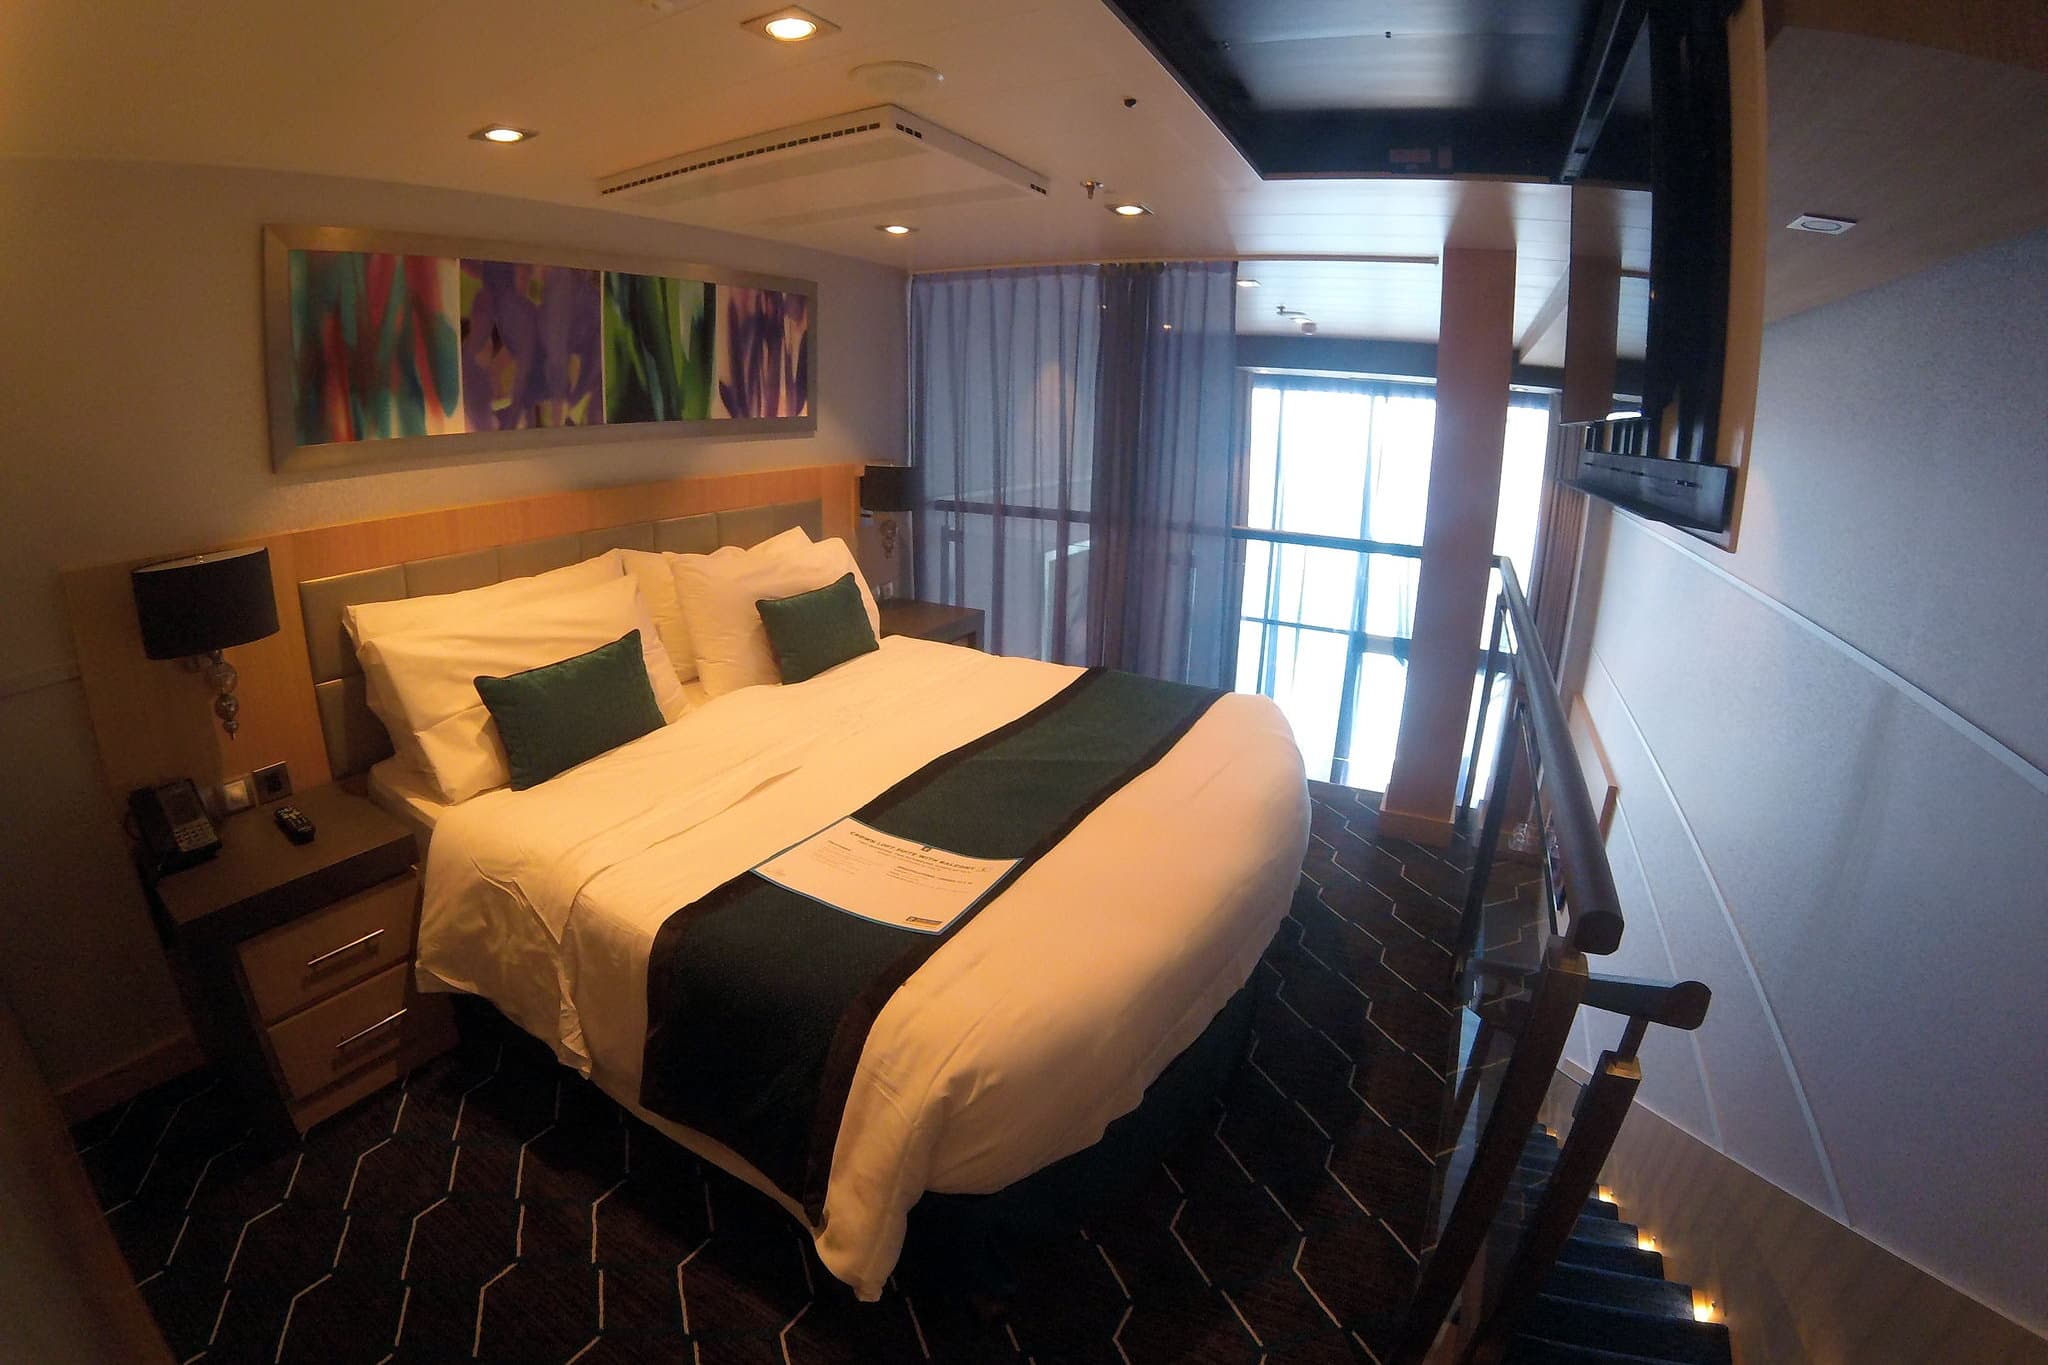 Harmony of the seas_Royal Family Suite_1722-24